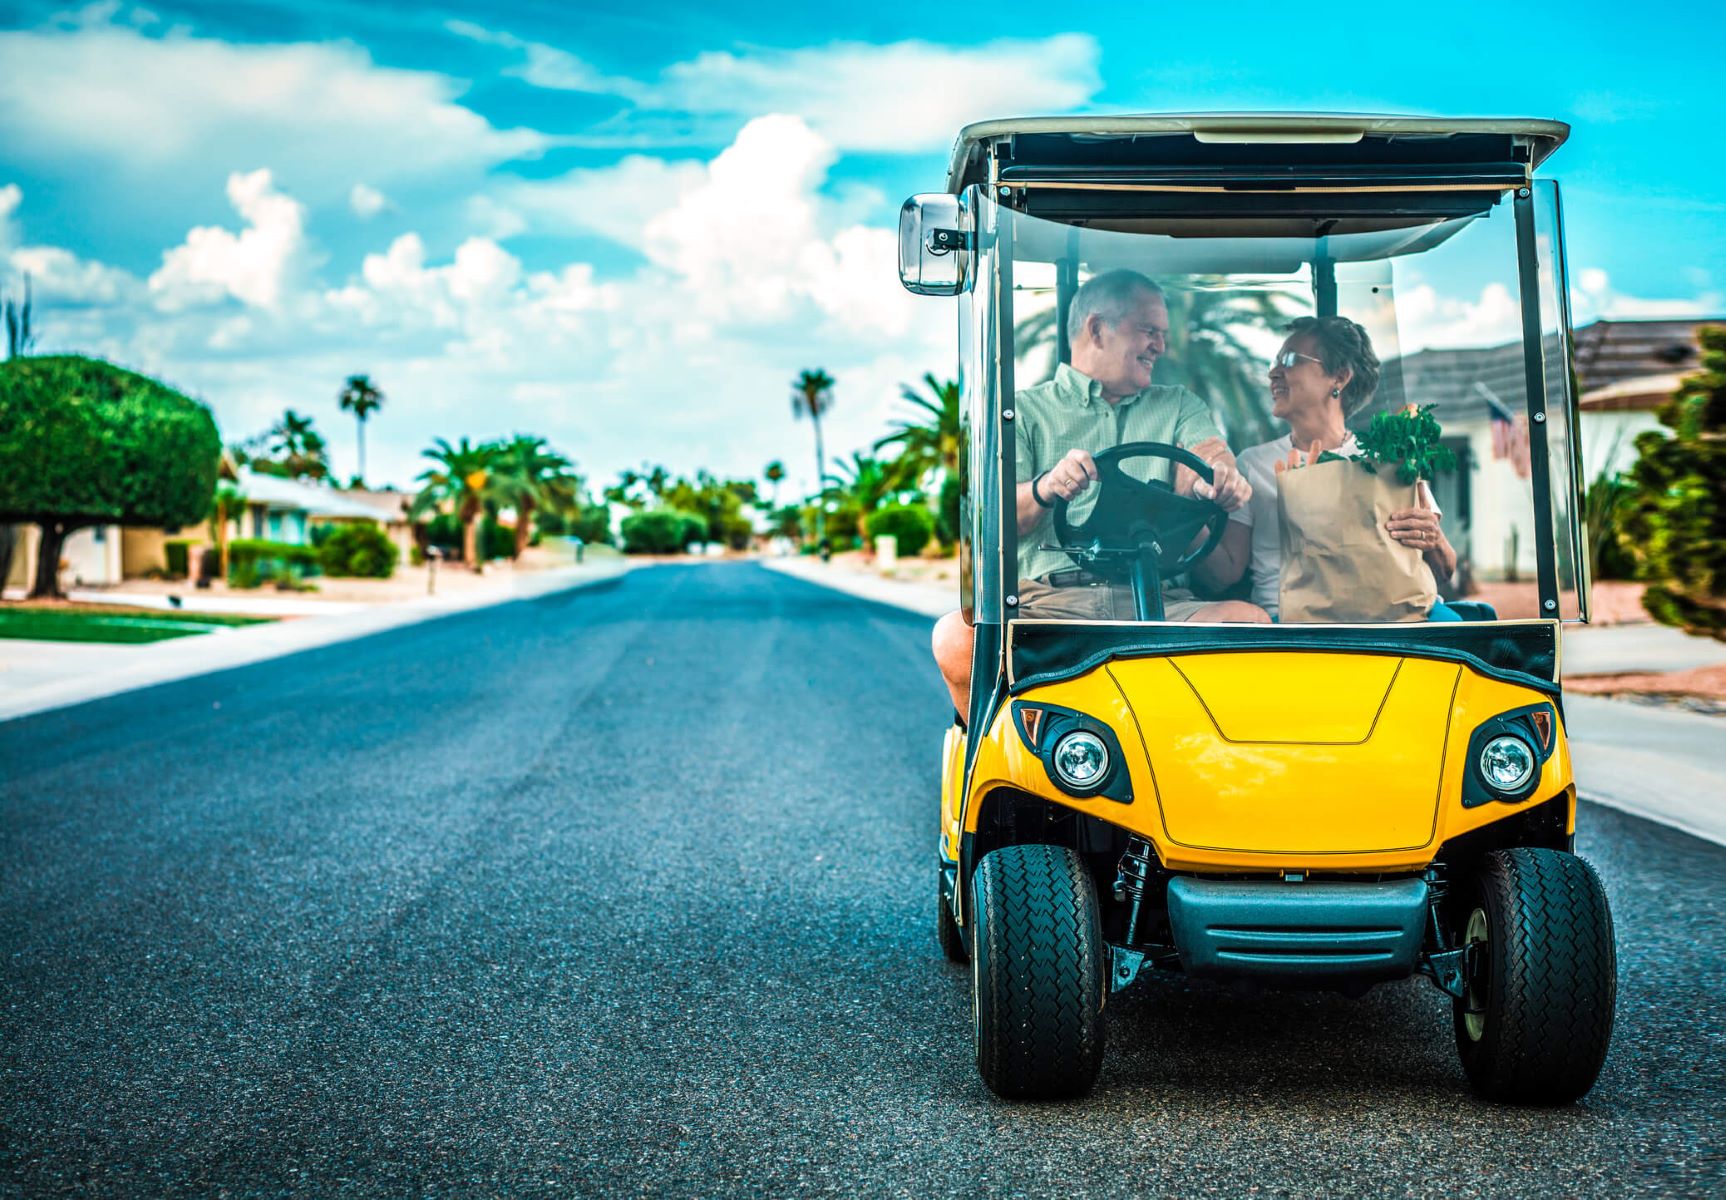 How Much Does Golf Cart Insurance Cost?